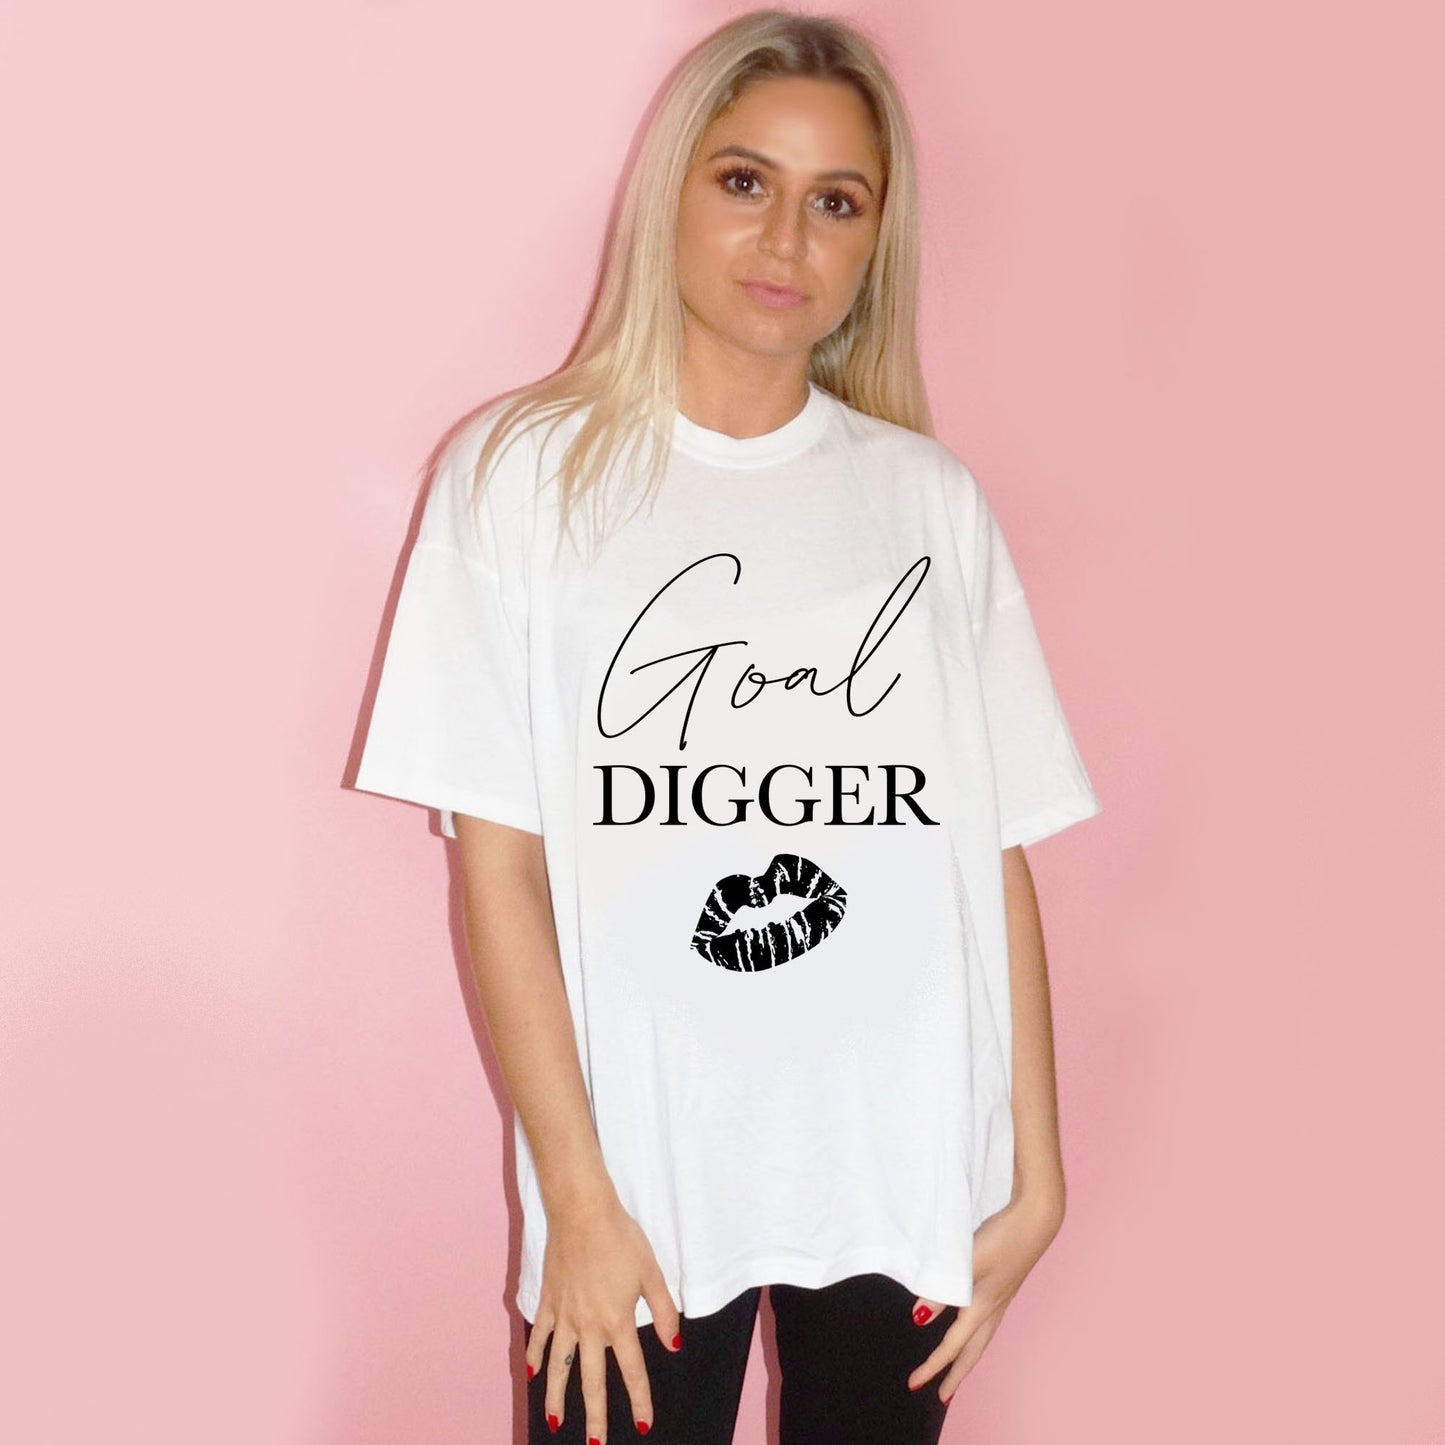 Goal Digger Tshirt In White